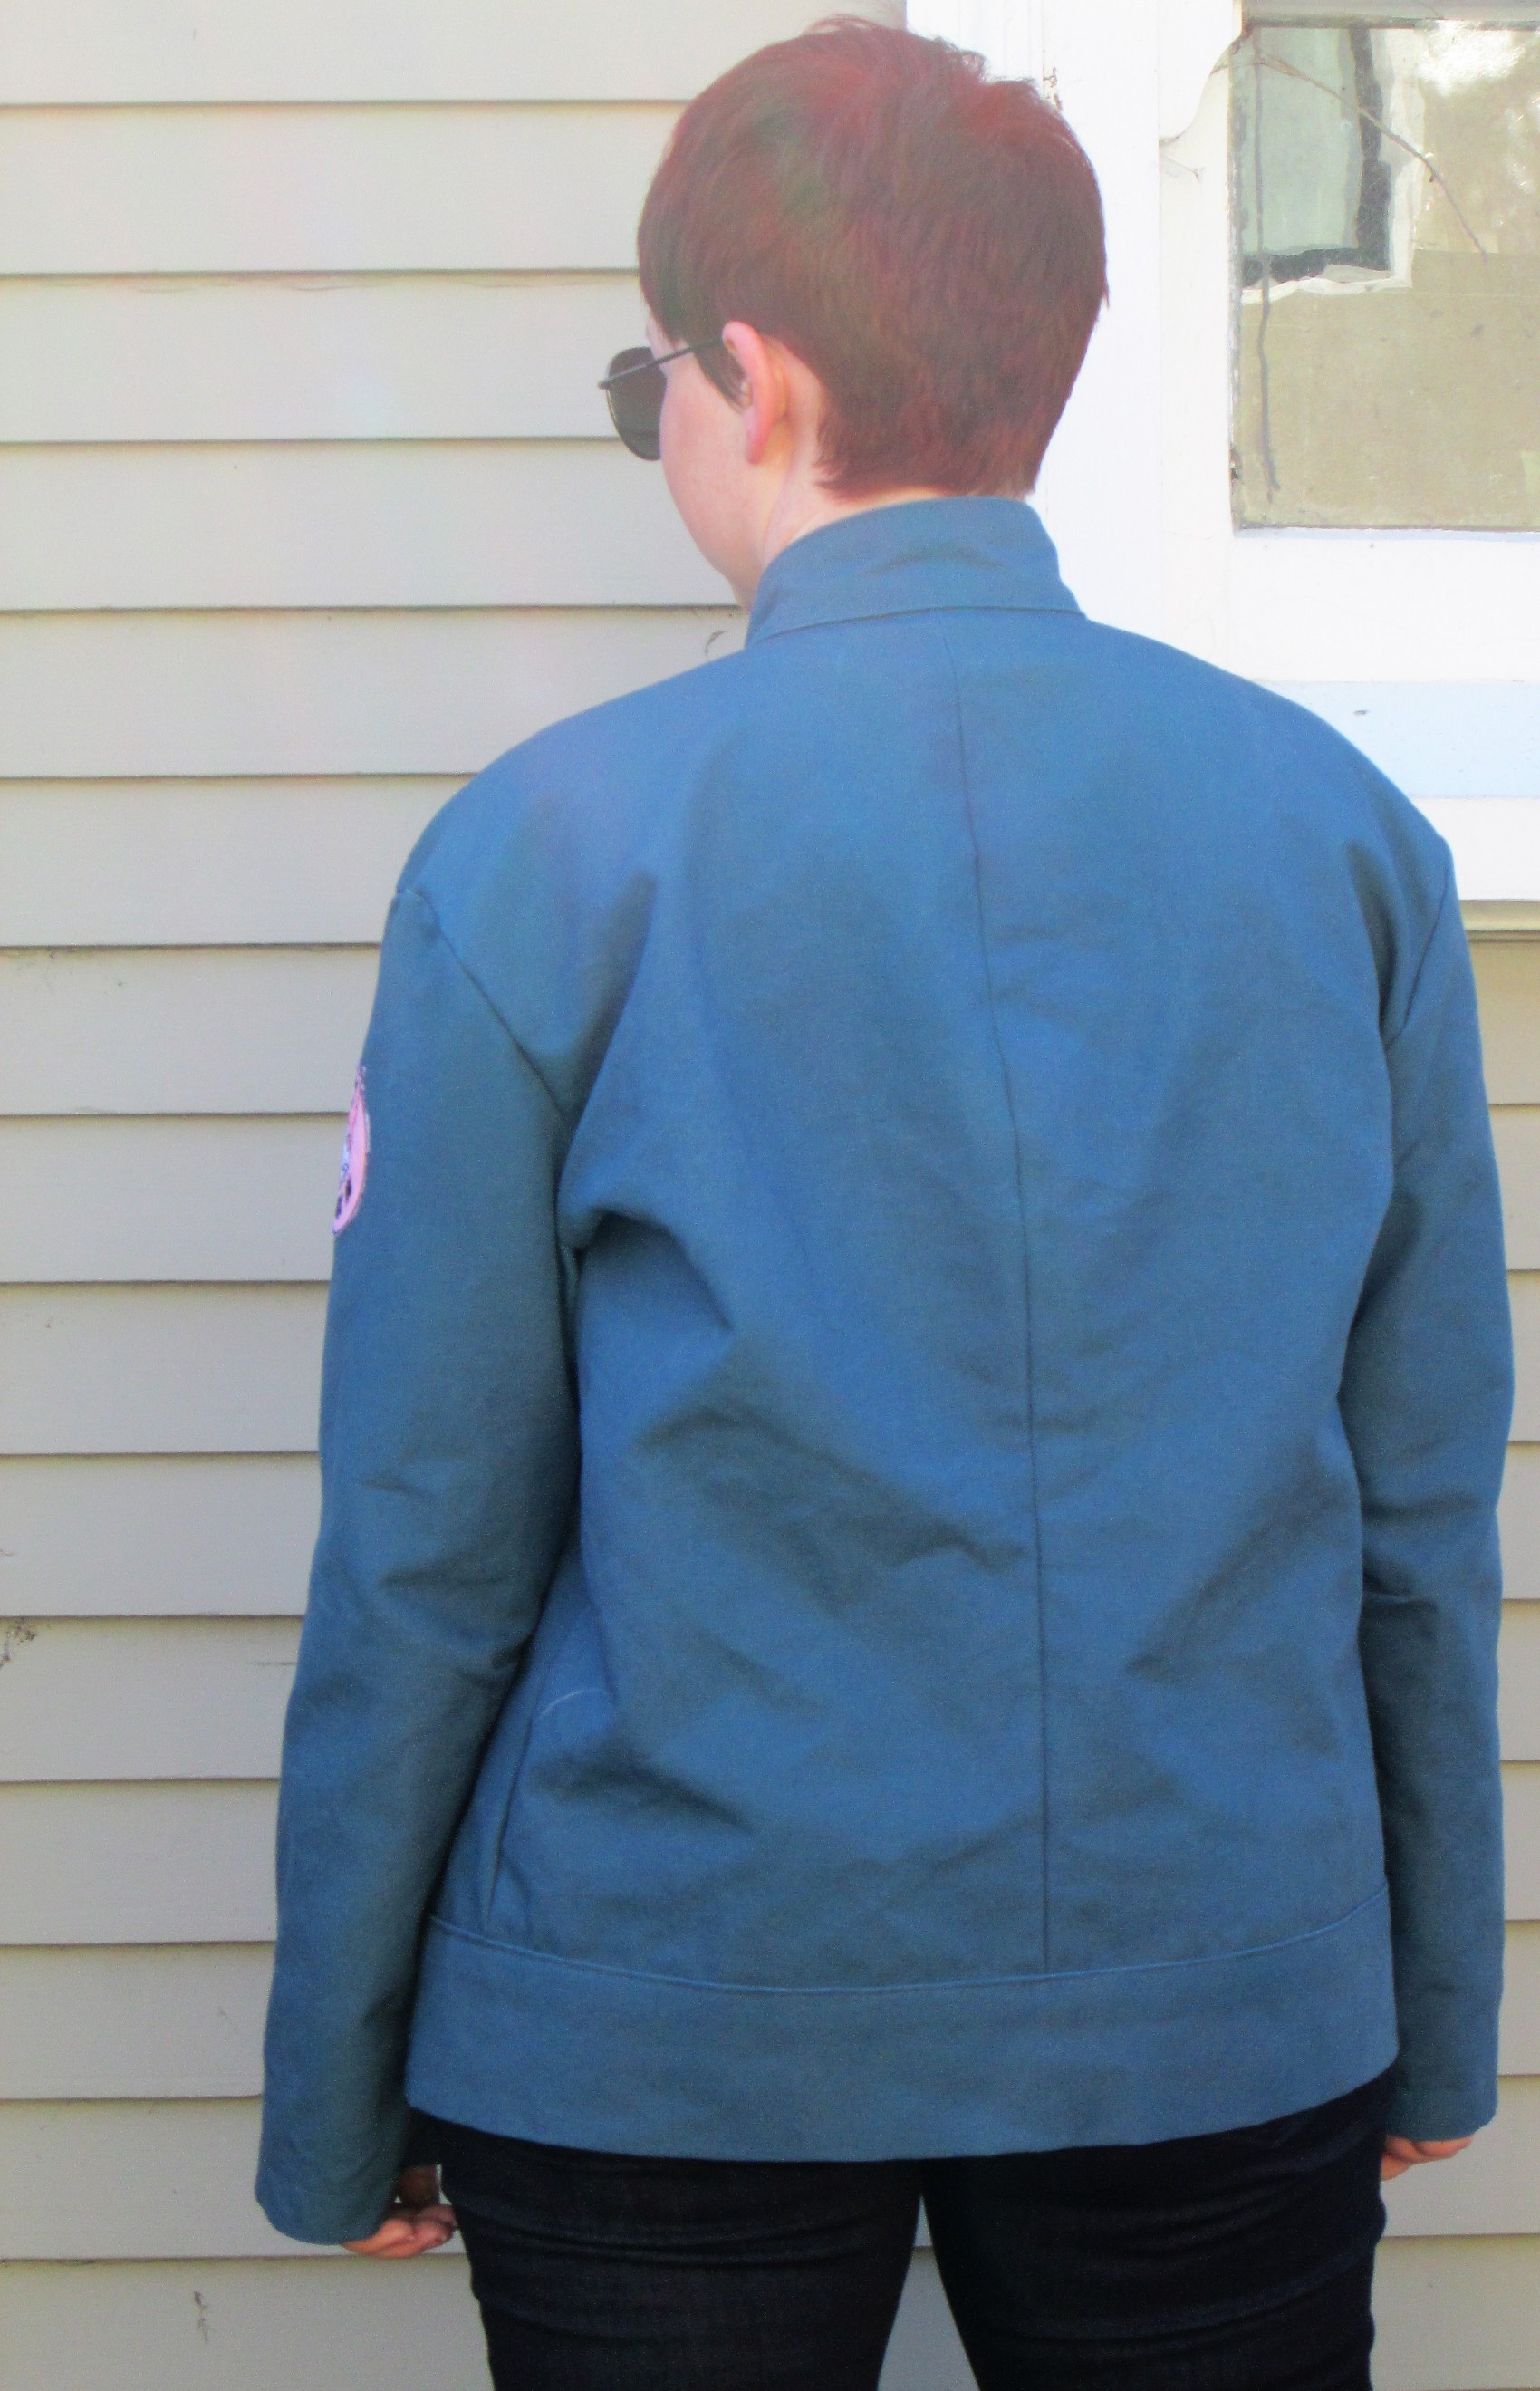 sewing – Crafted in Carhartt